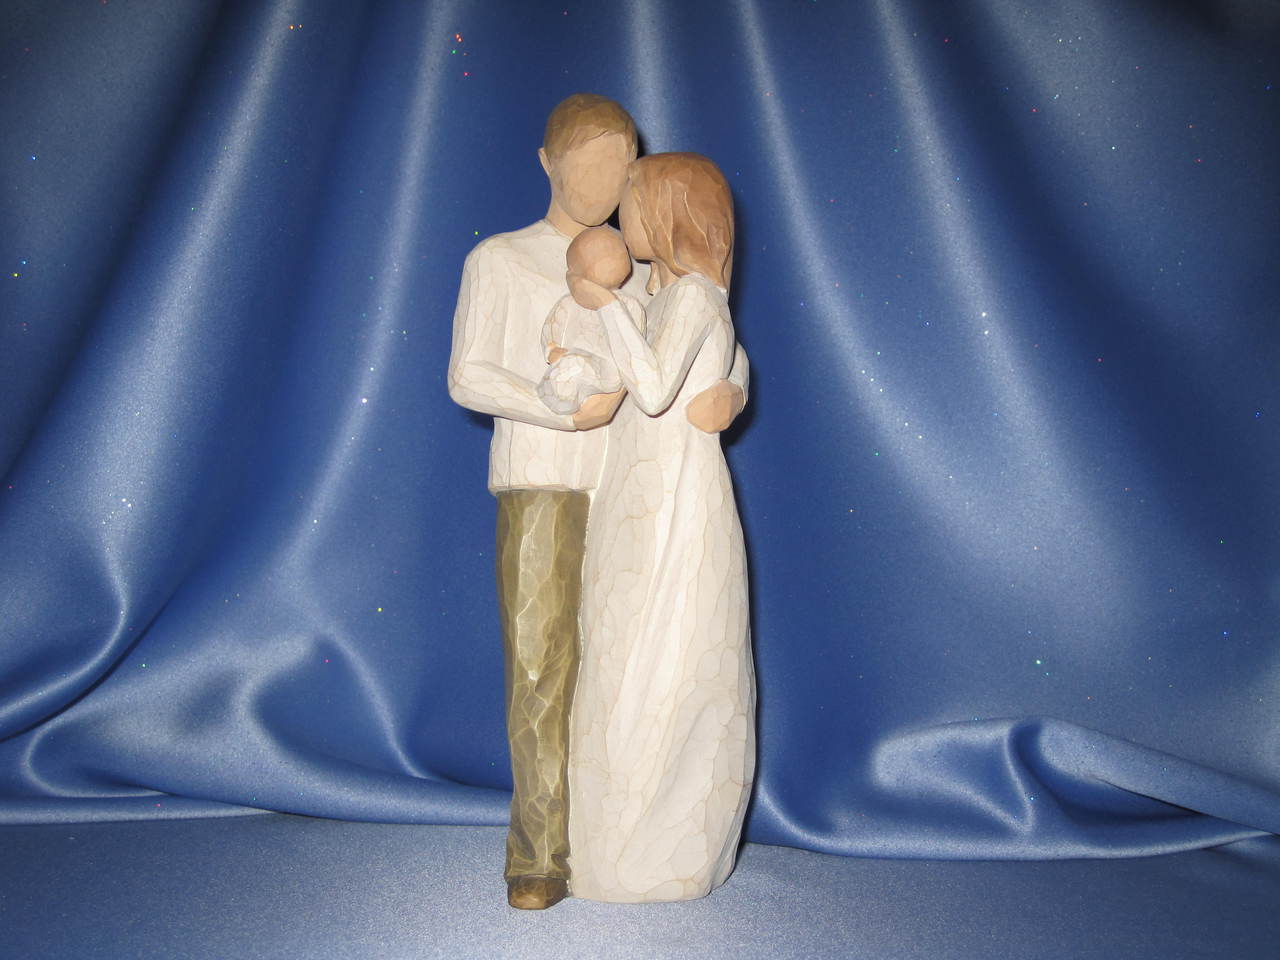 Primary image for Willow Tree "Our Gift" Figurine.